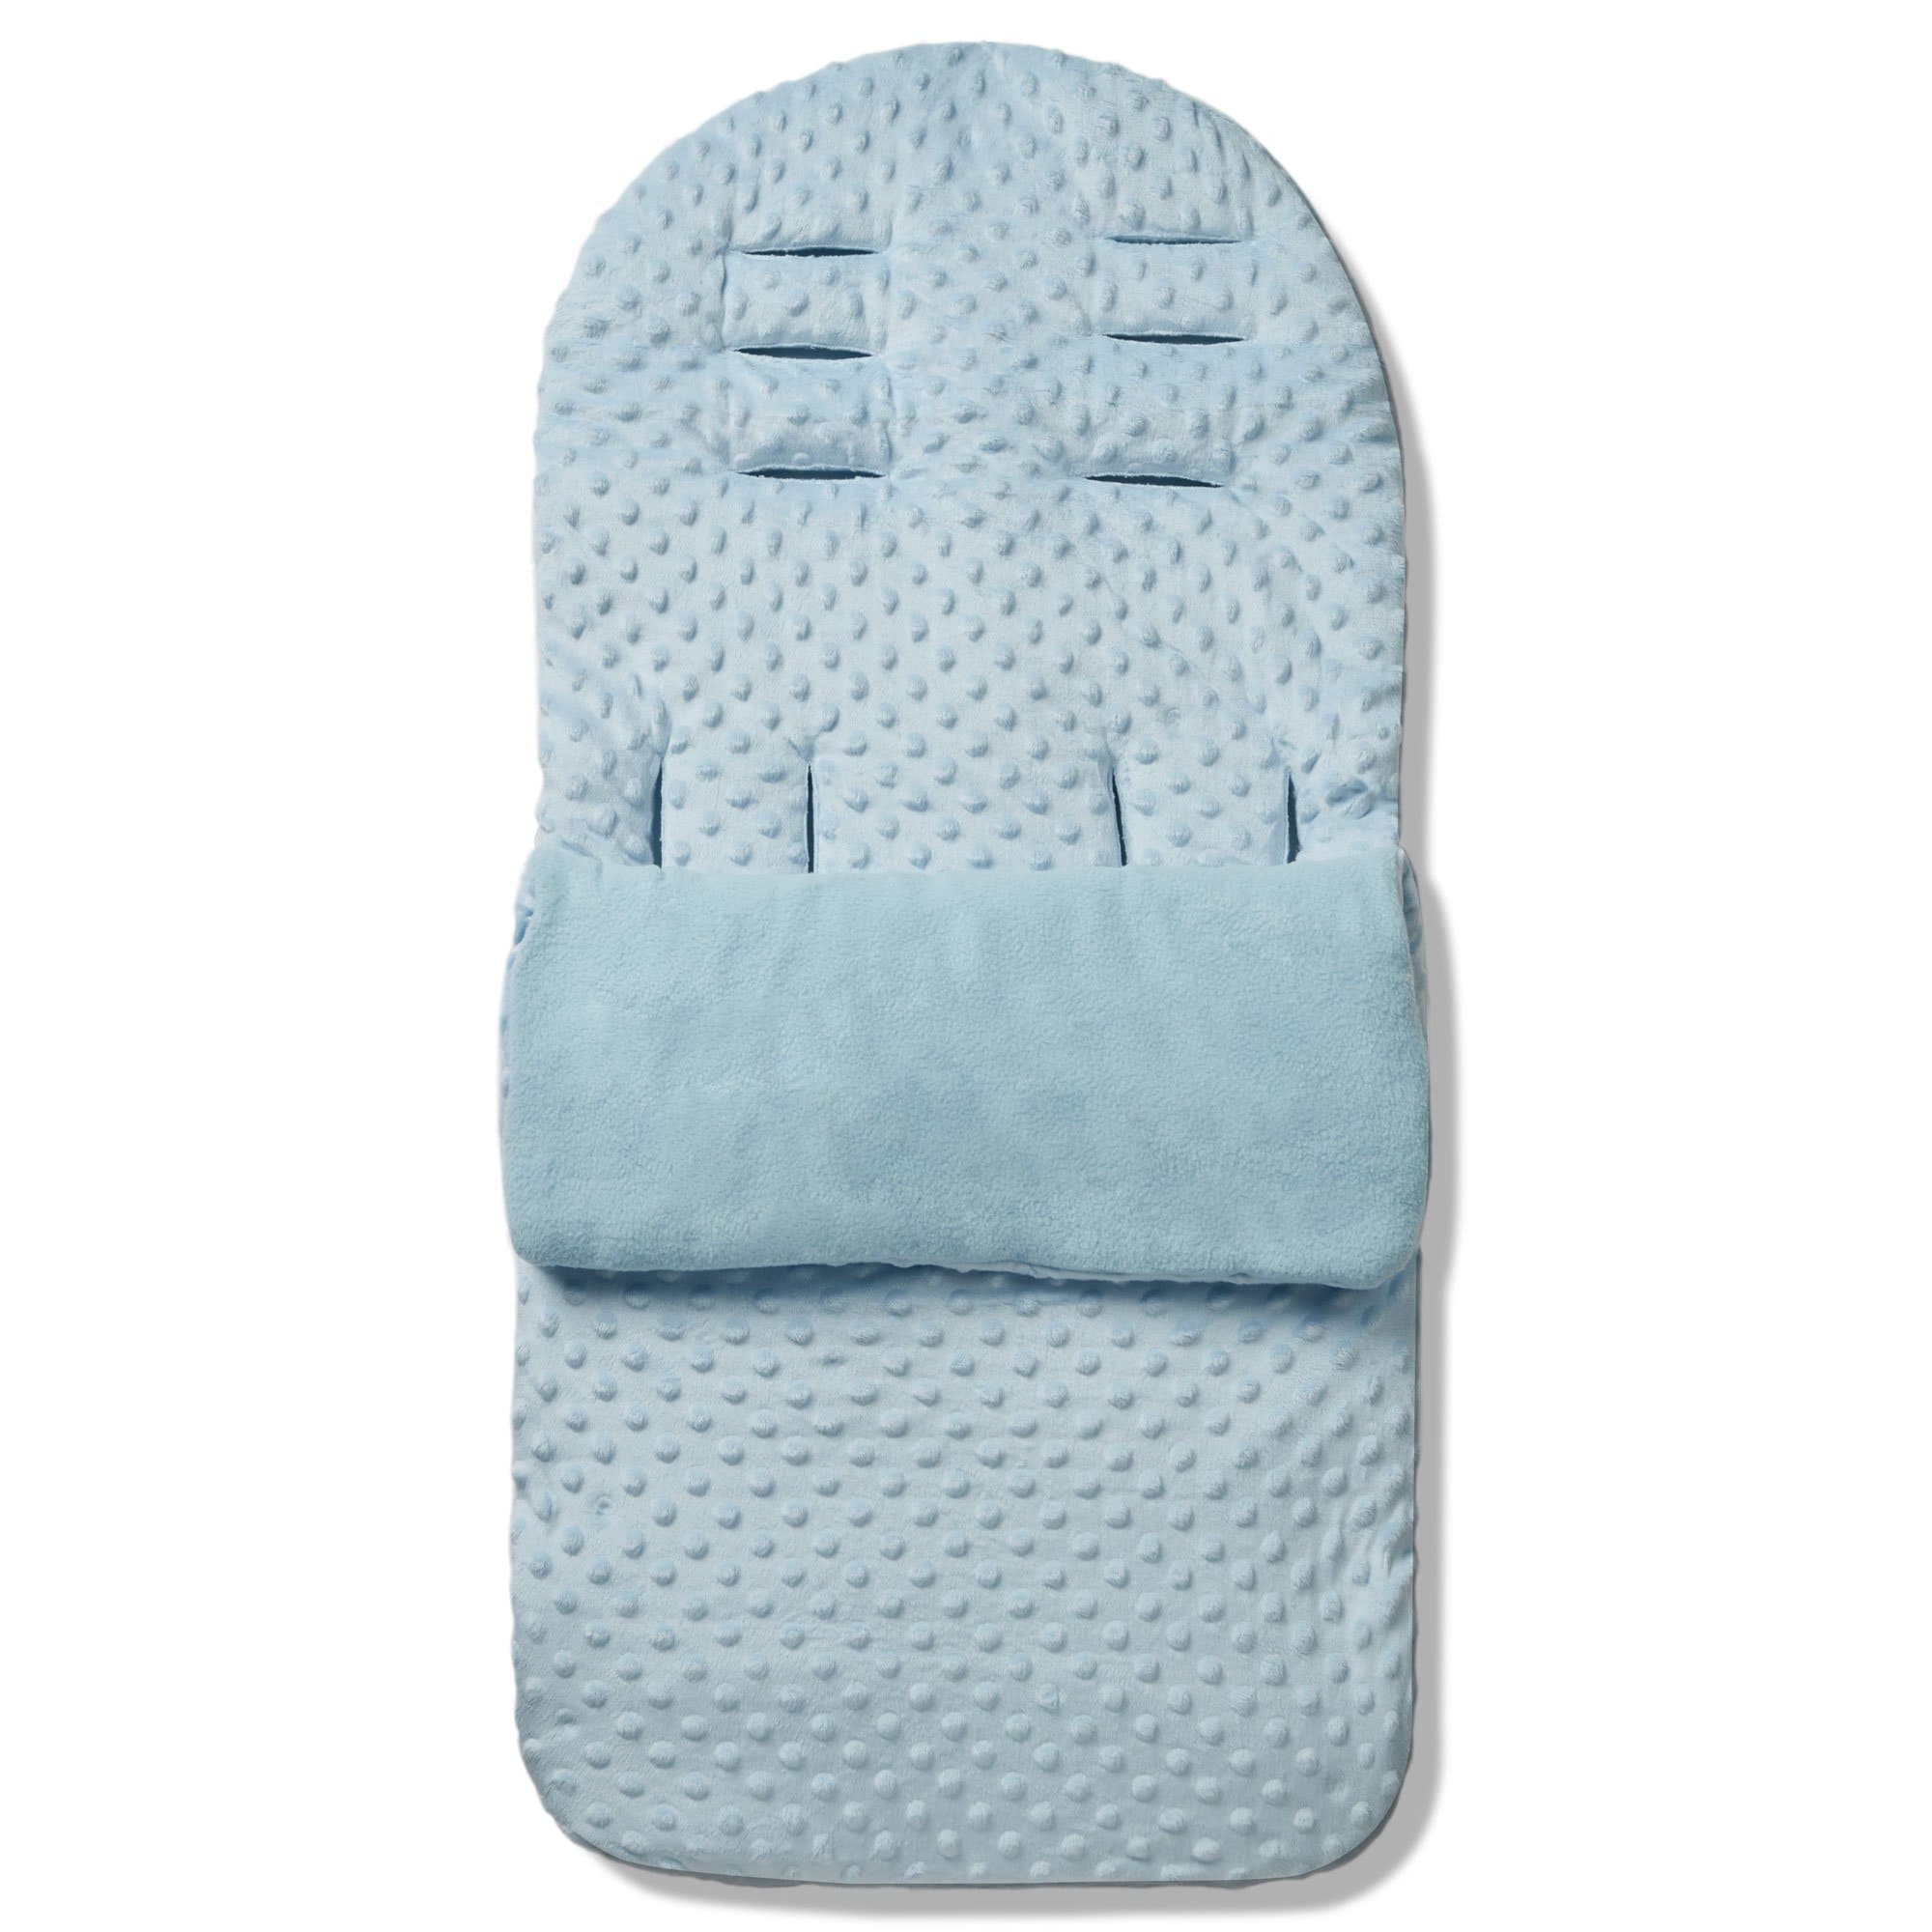 Dimple Footmuff / Cosy Toes Compatible with Bugaboo - Blue / Fits All Models | For Your Little One